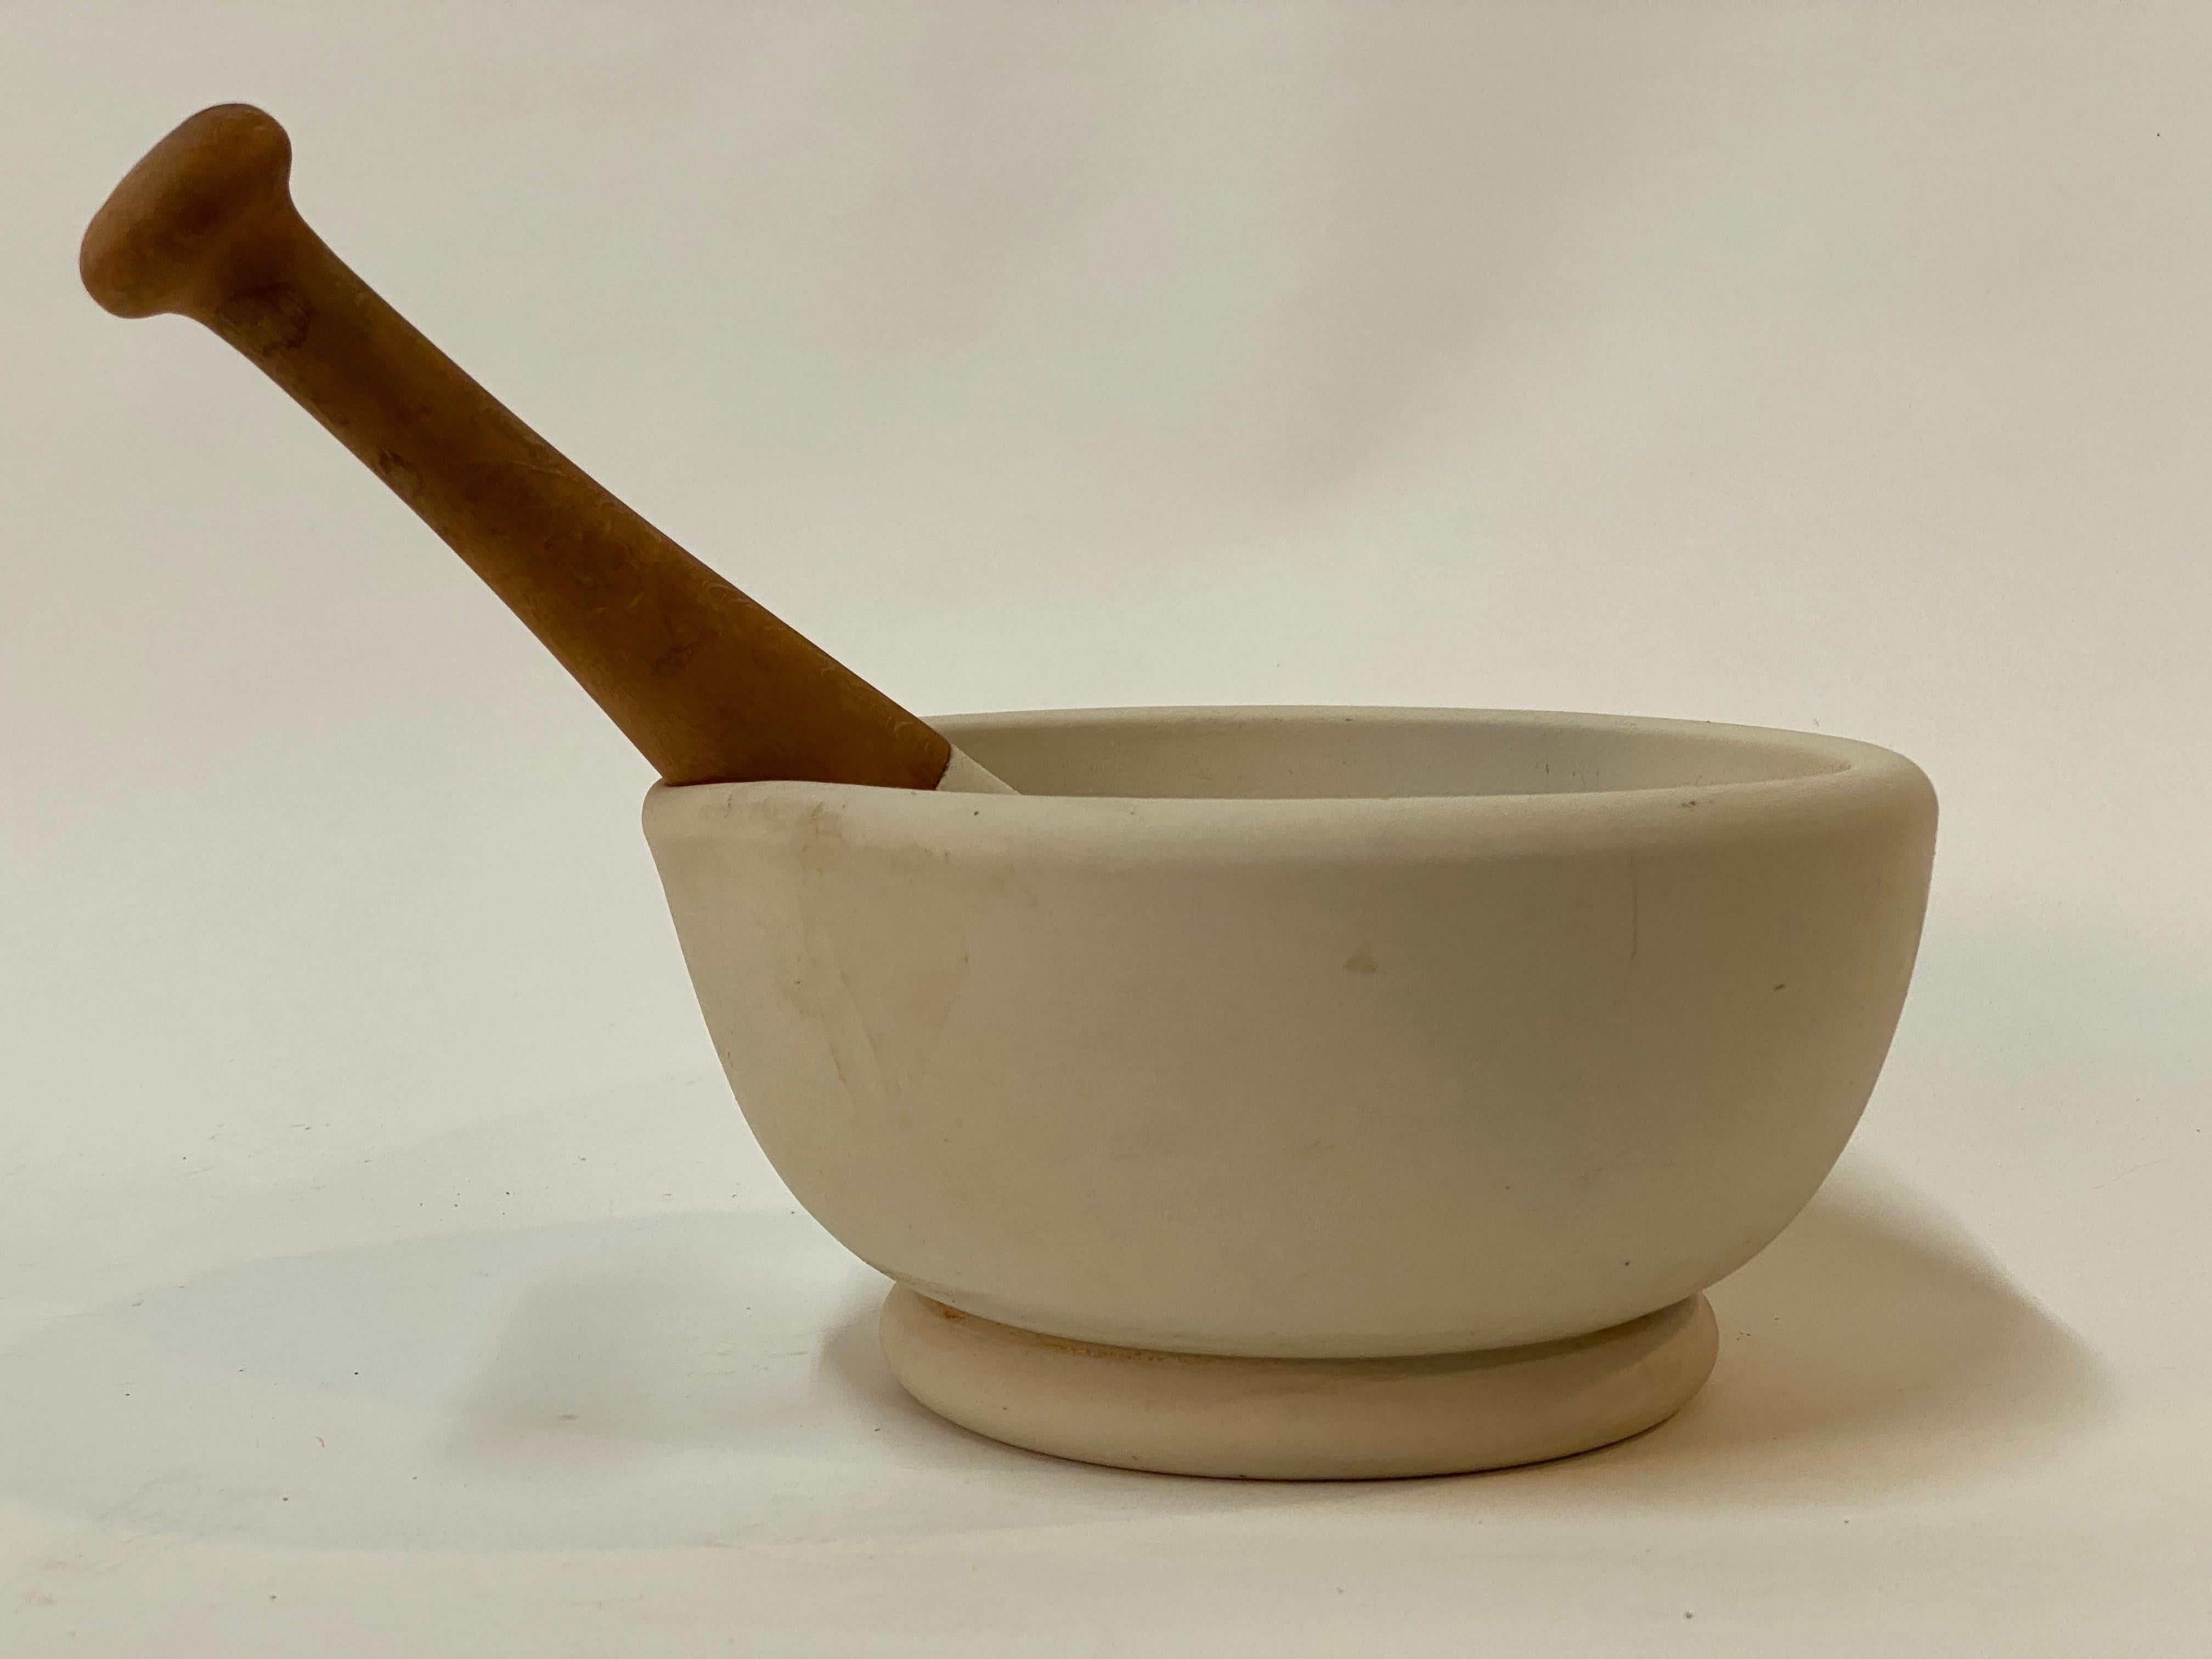 Rustic English Porcelain Mortar and Pestle #7 For Sale